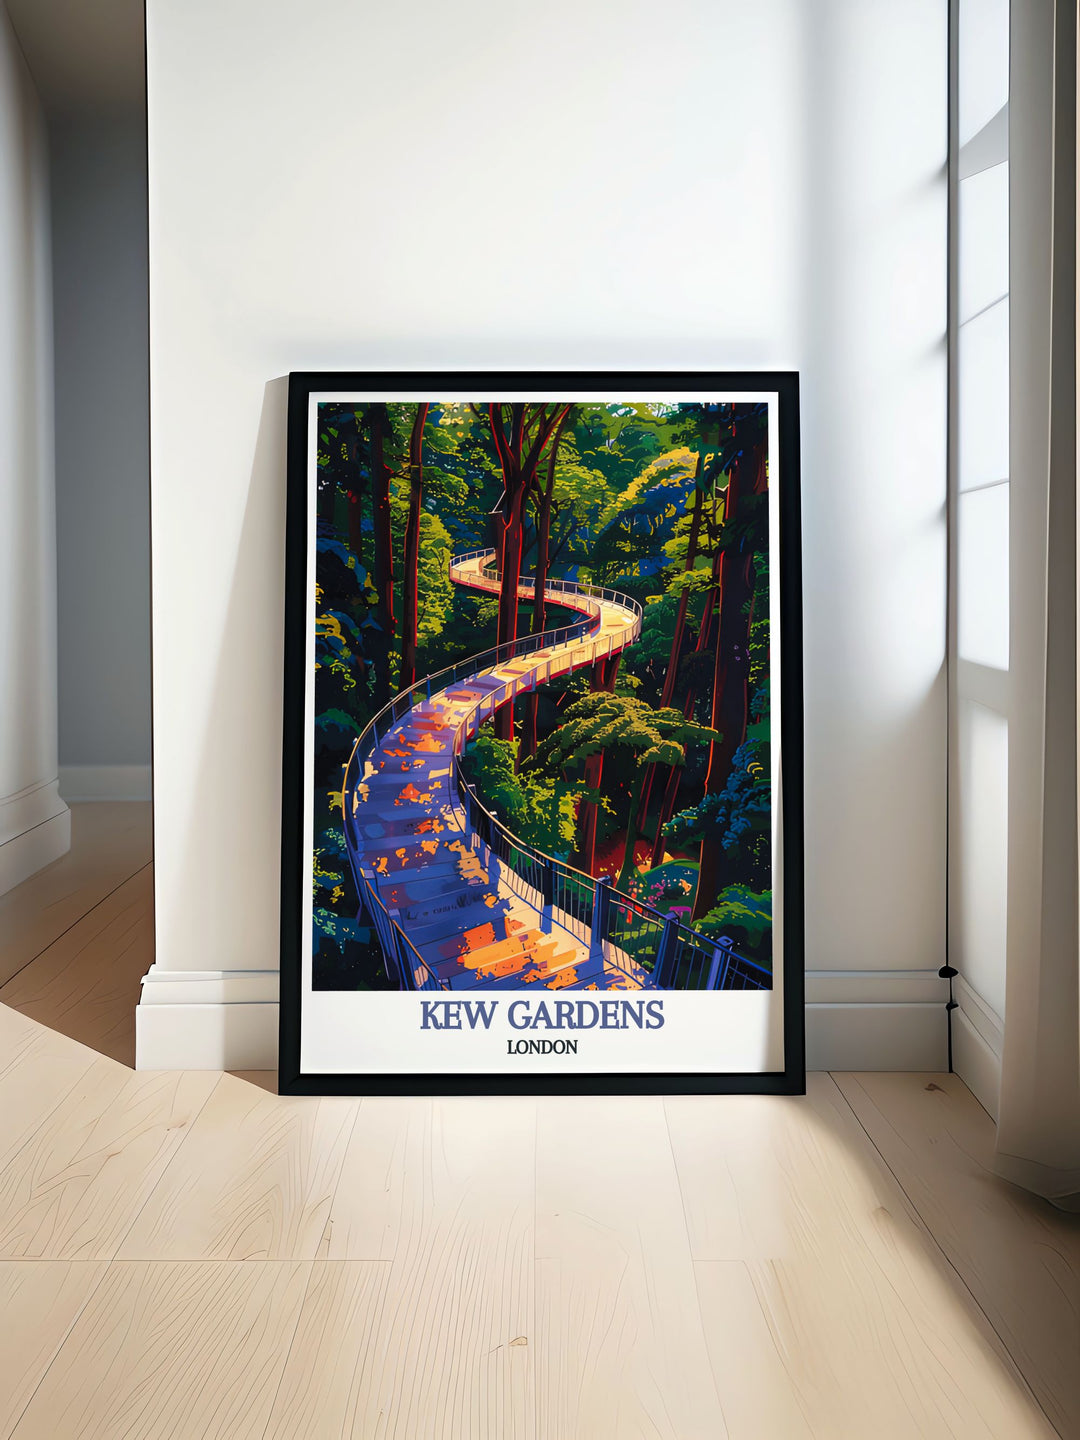 Celebrating Englands rich horticultural traditions, this poster showcases scenes that highlight the countrys iconic gardens. Perfect for those who love exploring nature, this artwork brings the beauty of England into your home.